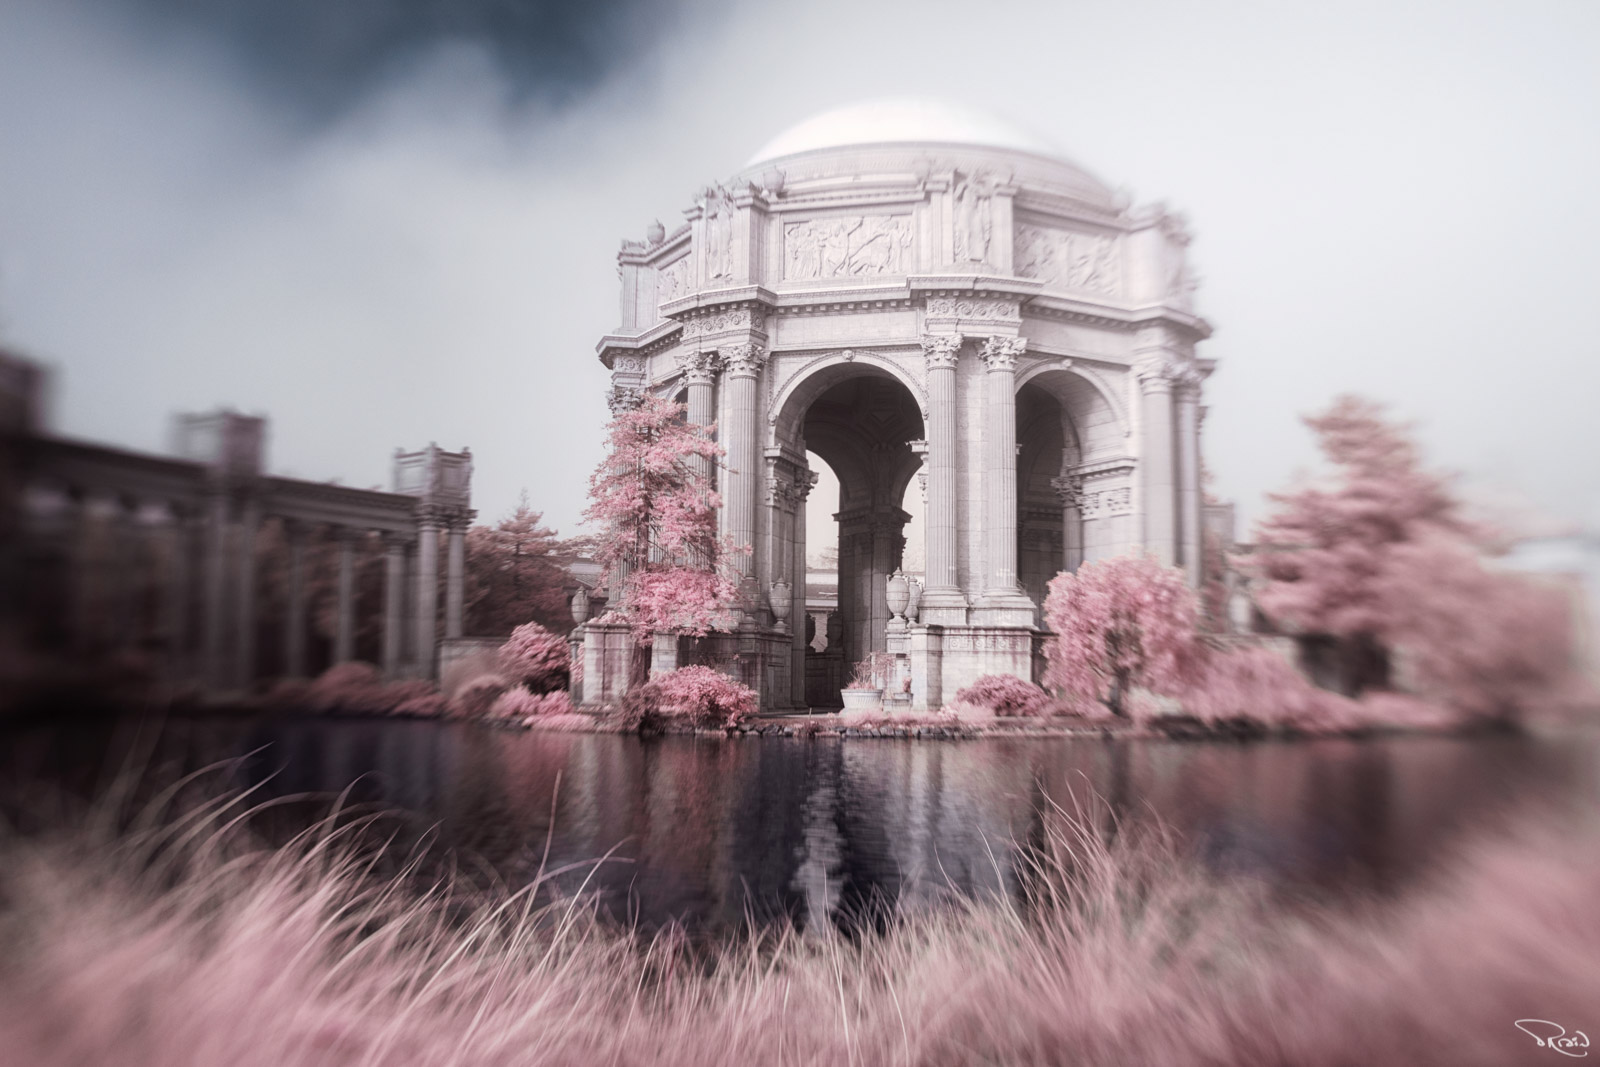 San Francisco's iconic Palace of Fine Arts is framed by a black lagoon and pink grasses in a hazy, dreamlike setting.